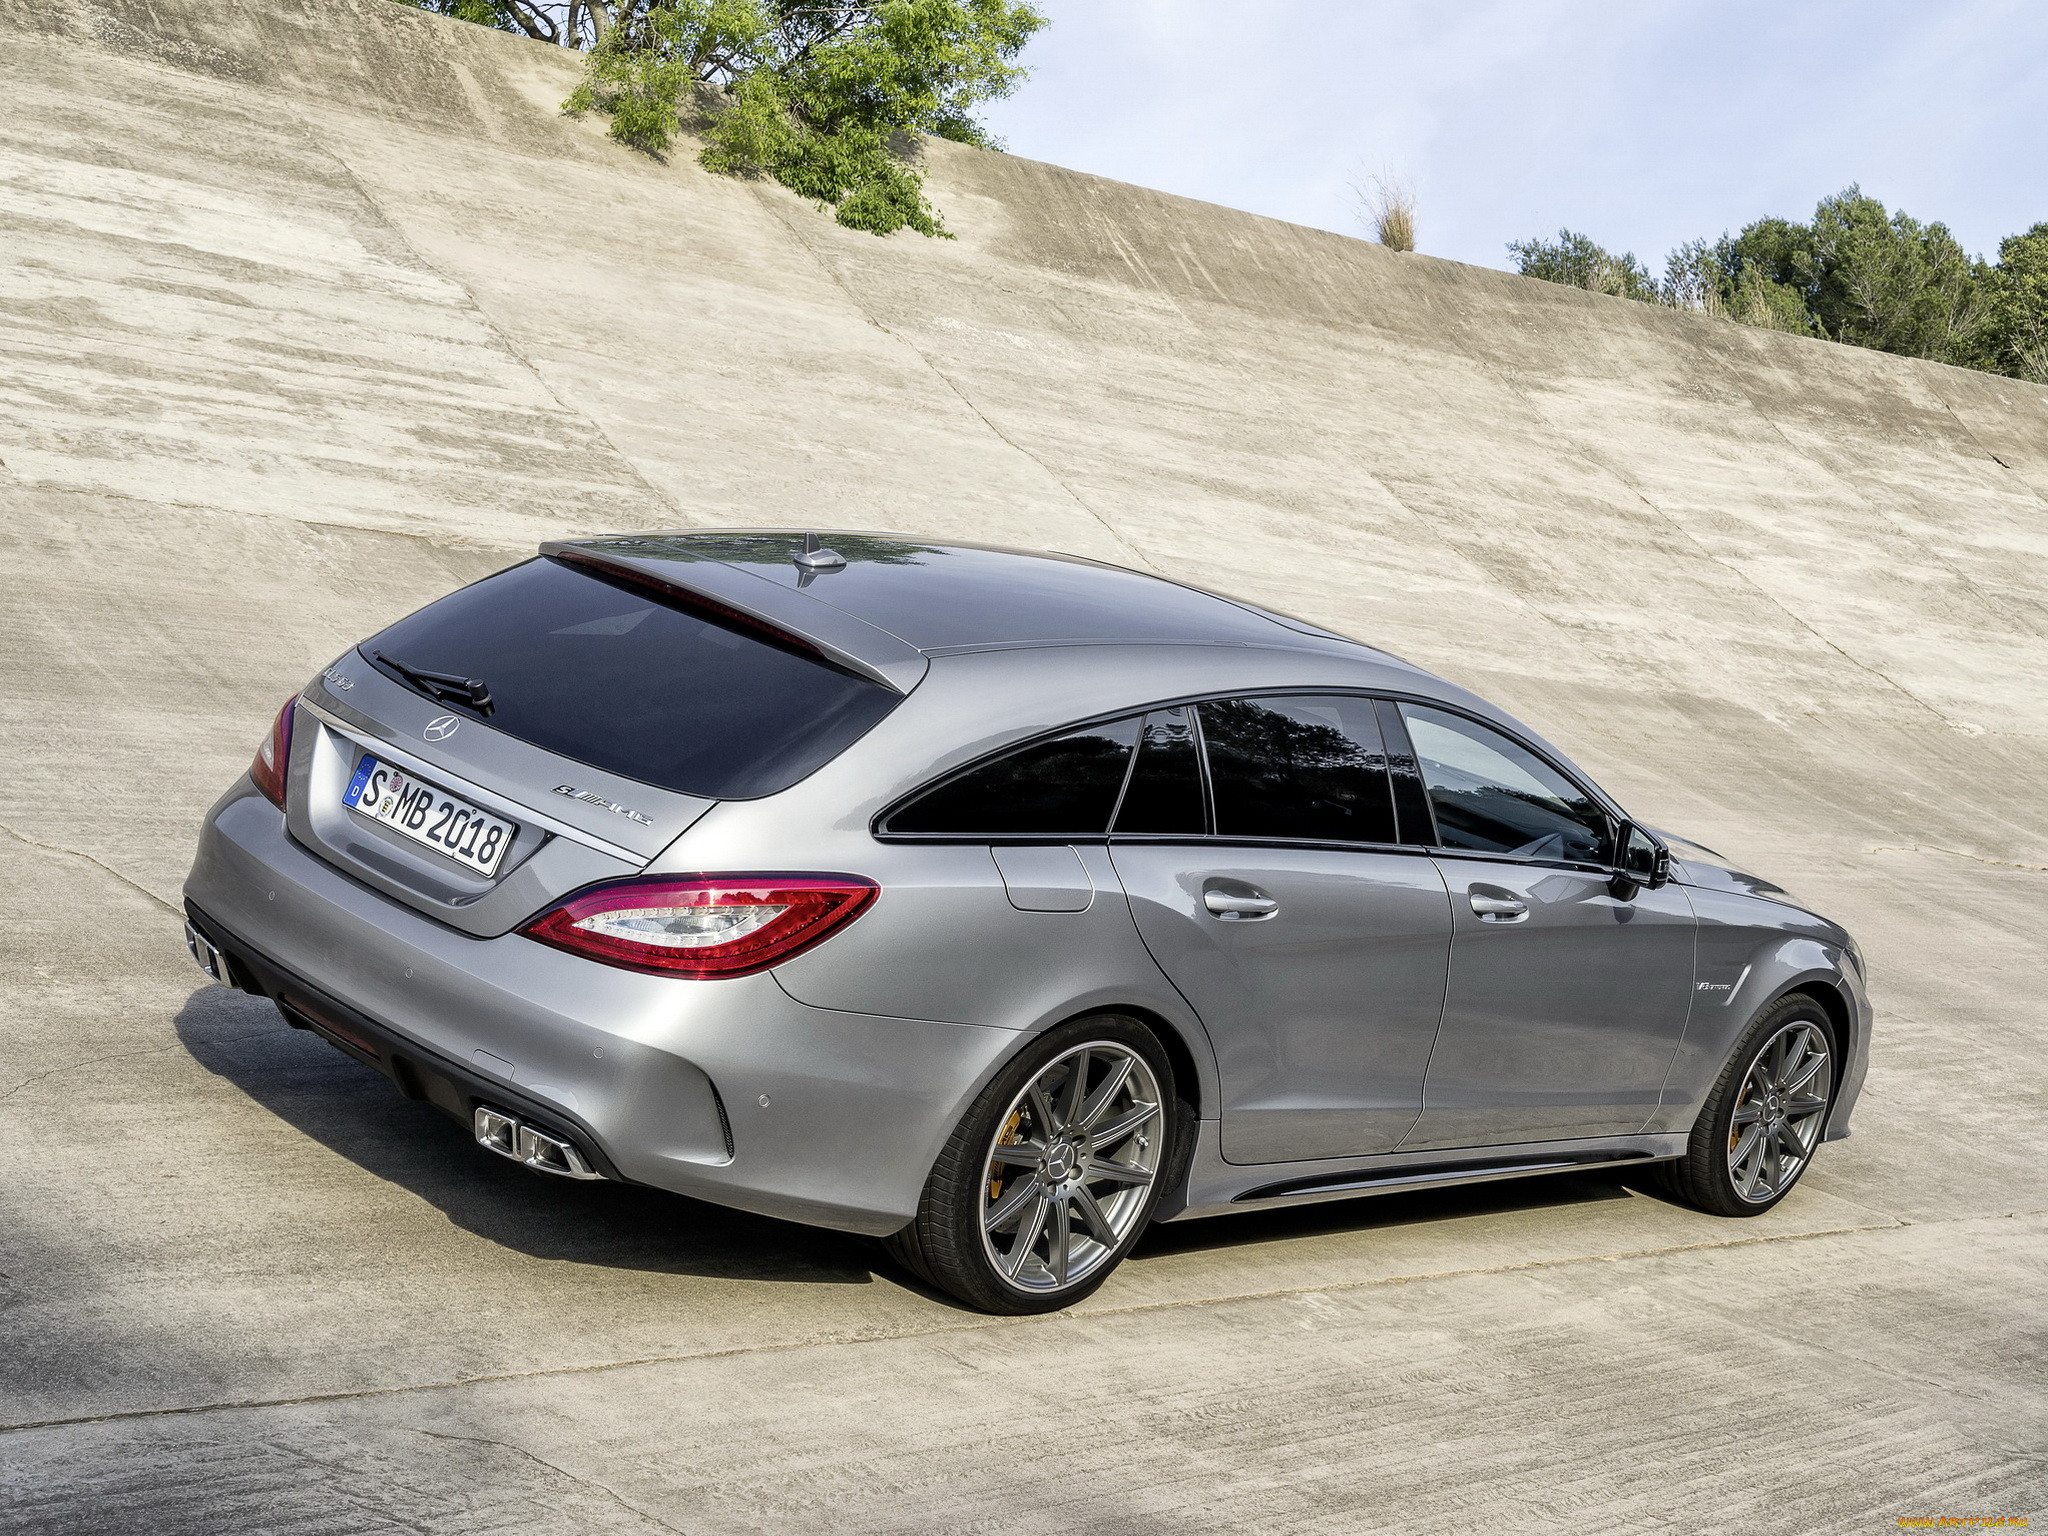 , mercedes-benz, cls, package, x218, 2014, , 400, shooting, sports, amg, brake